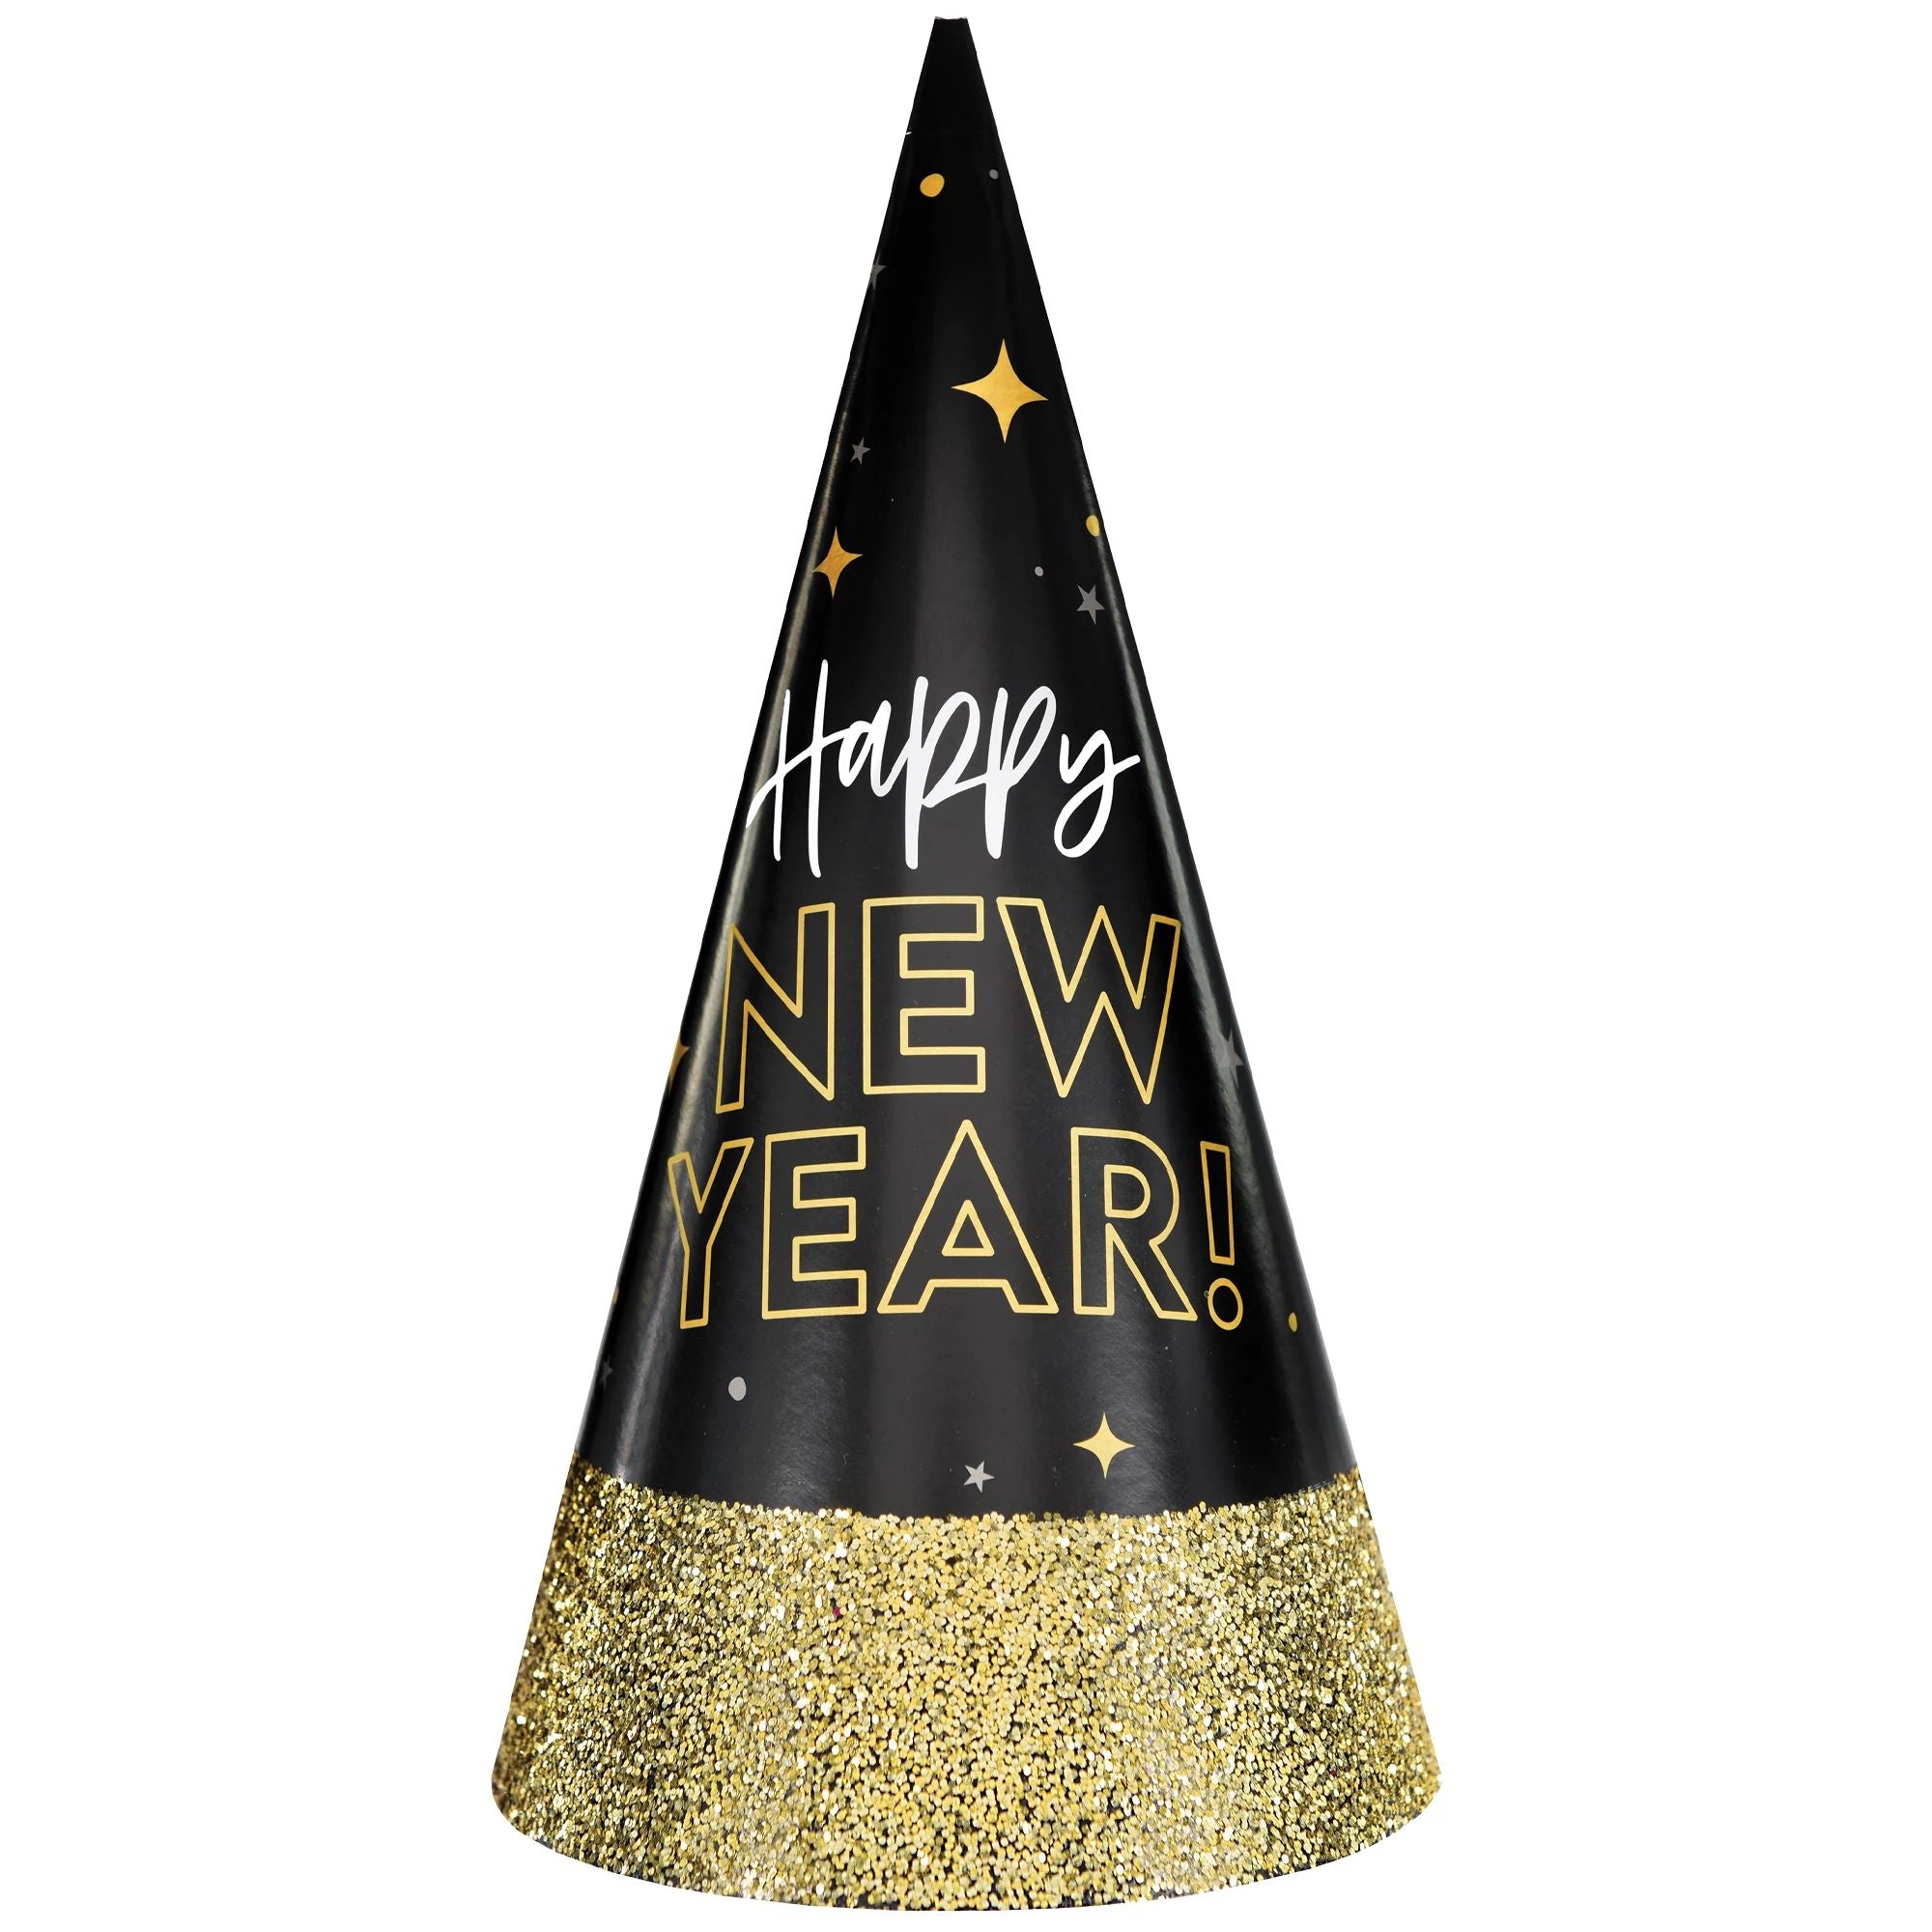 Happy New Year's Glitter Dipped Cone Hat - Black, Silver, Gold